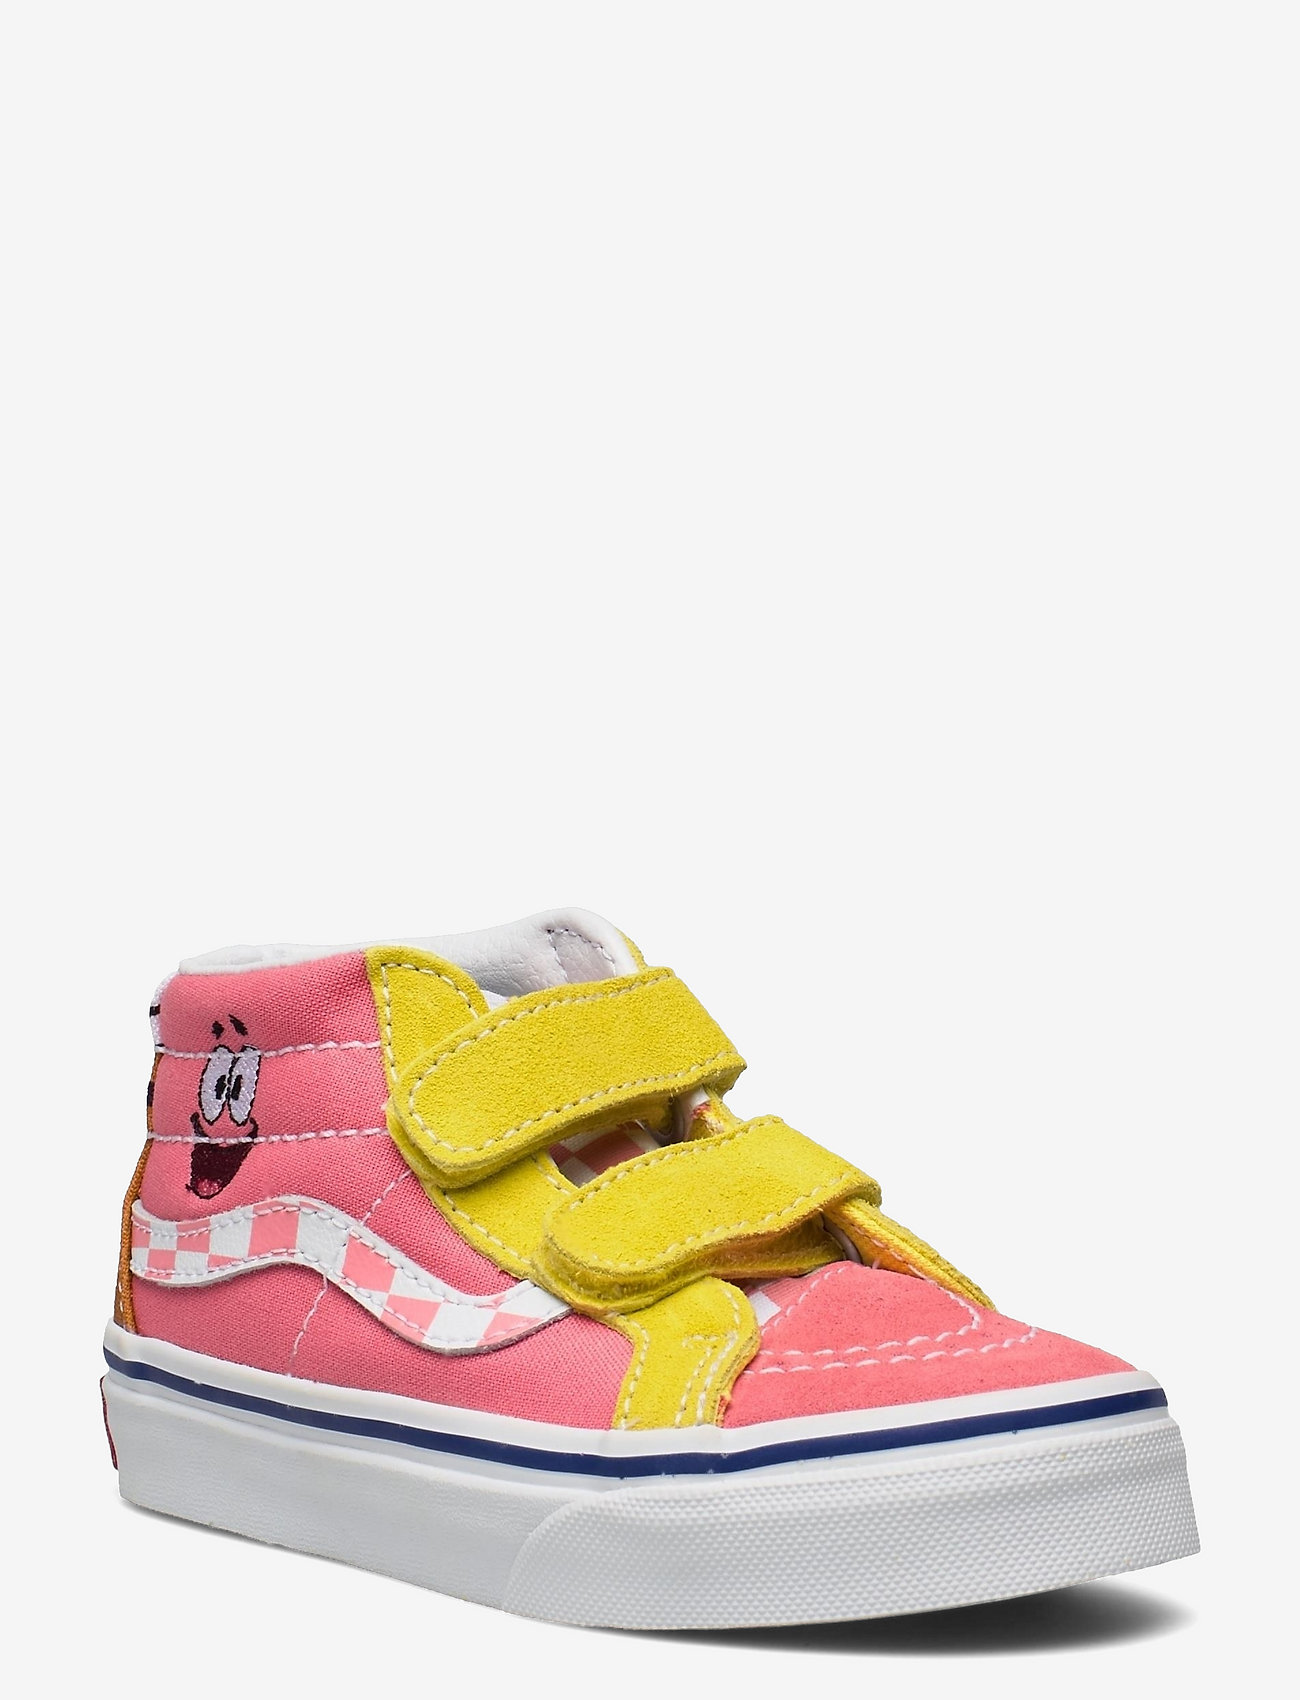 youth vans high tops